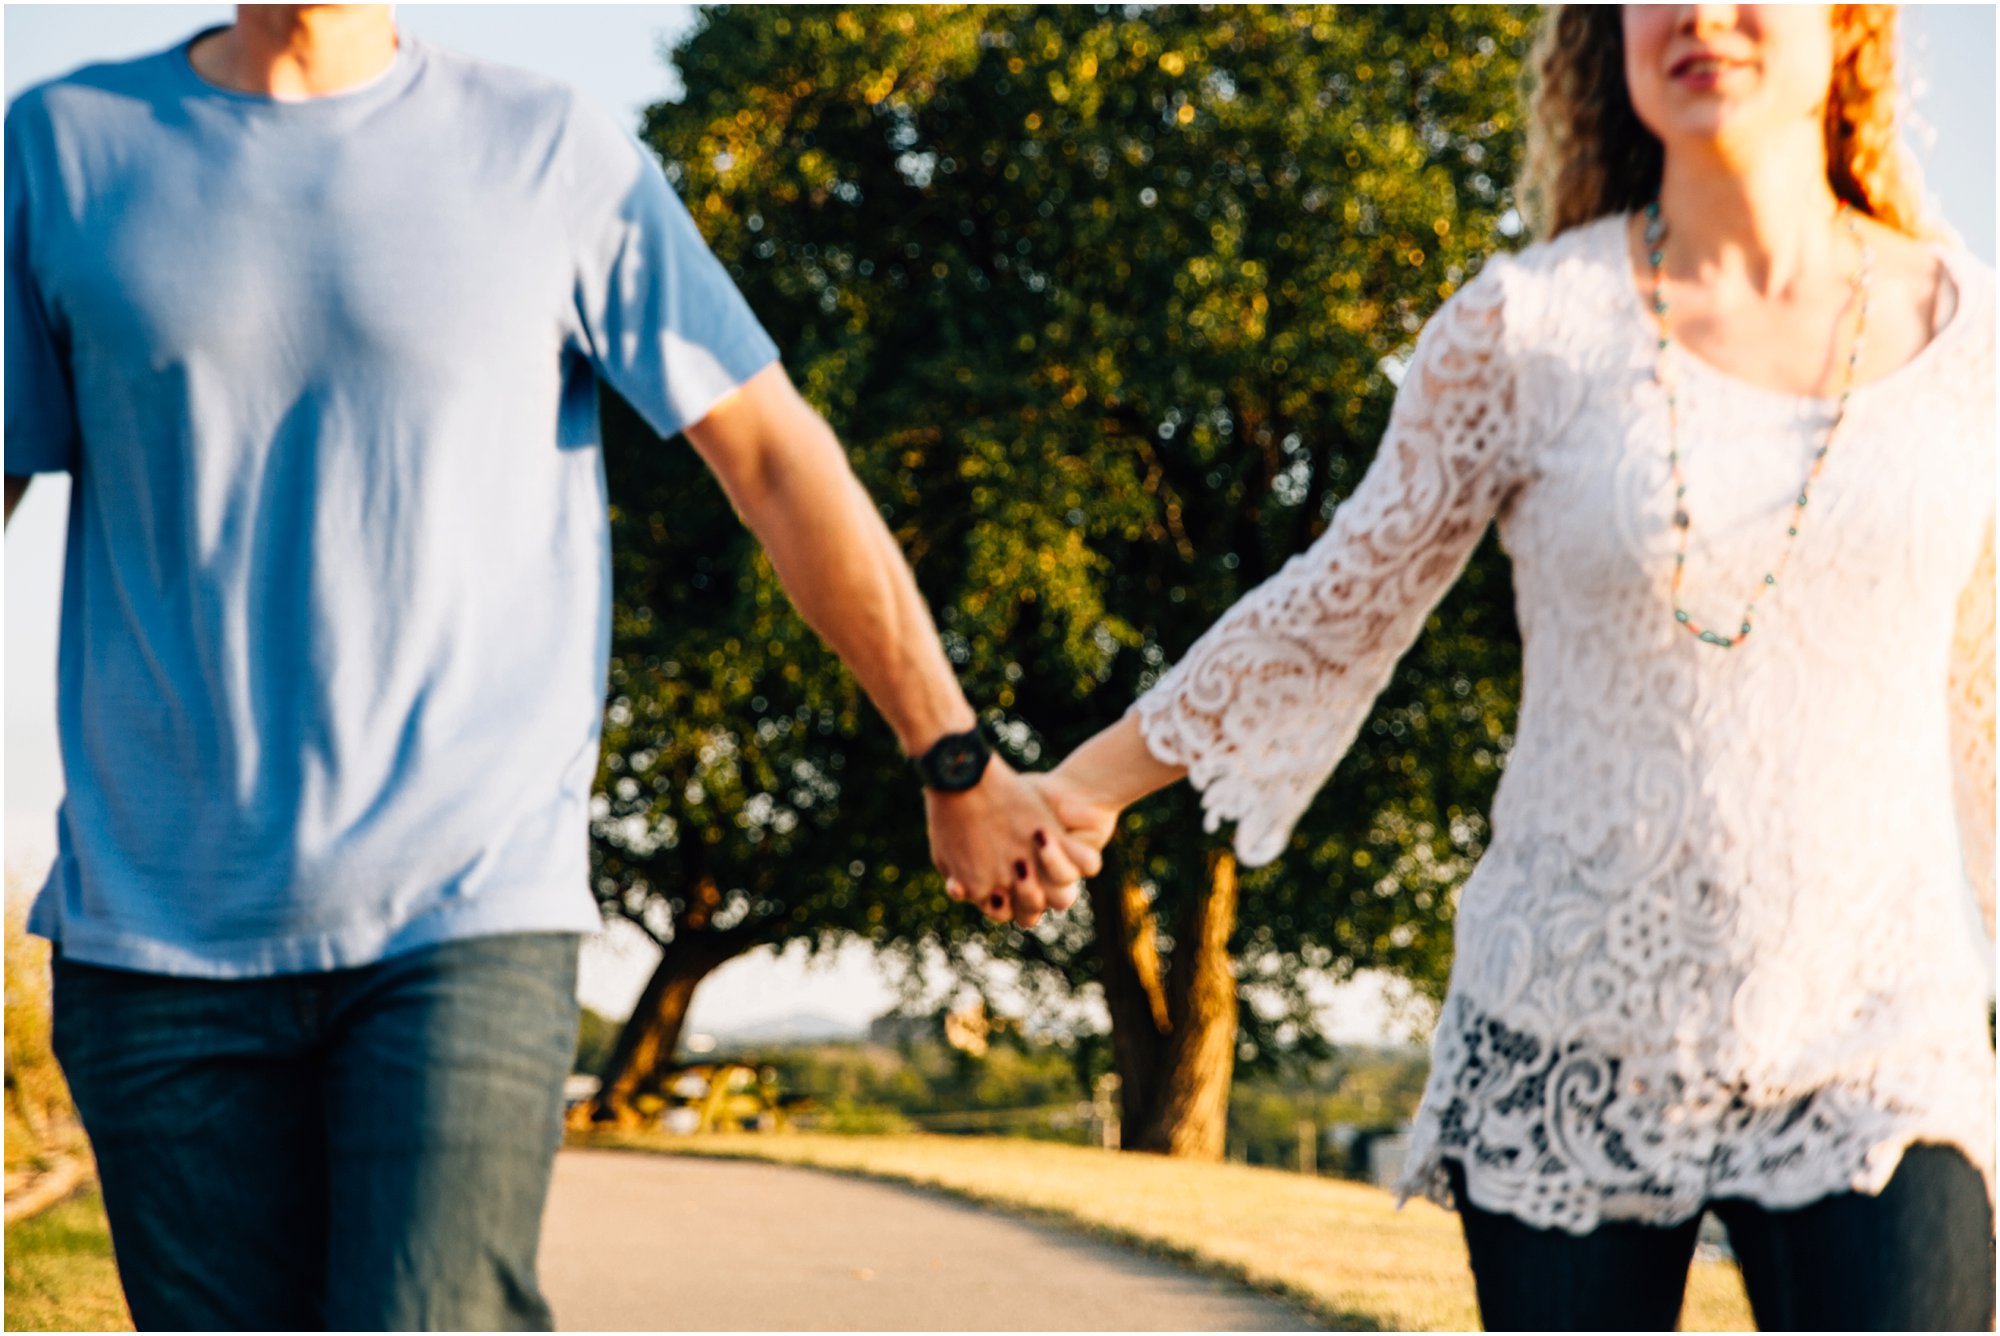 Engaged couple running towards camera while holding hands